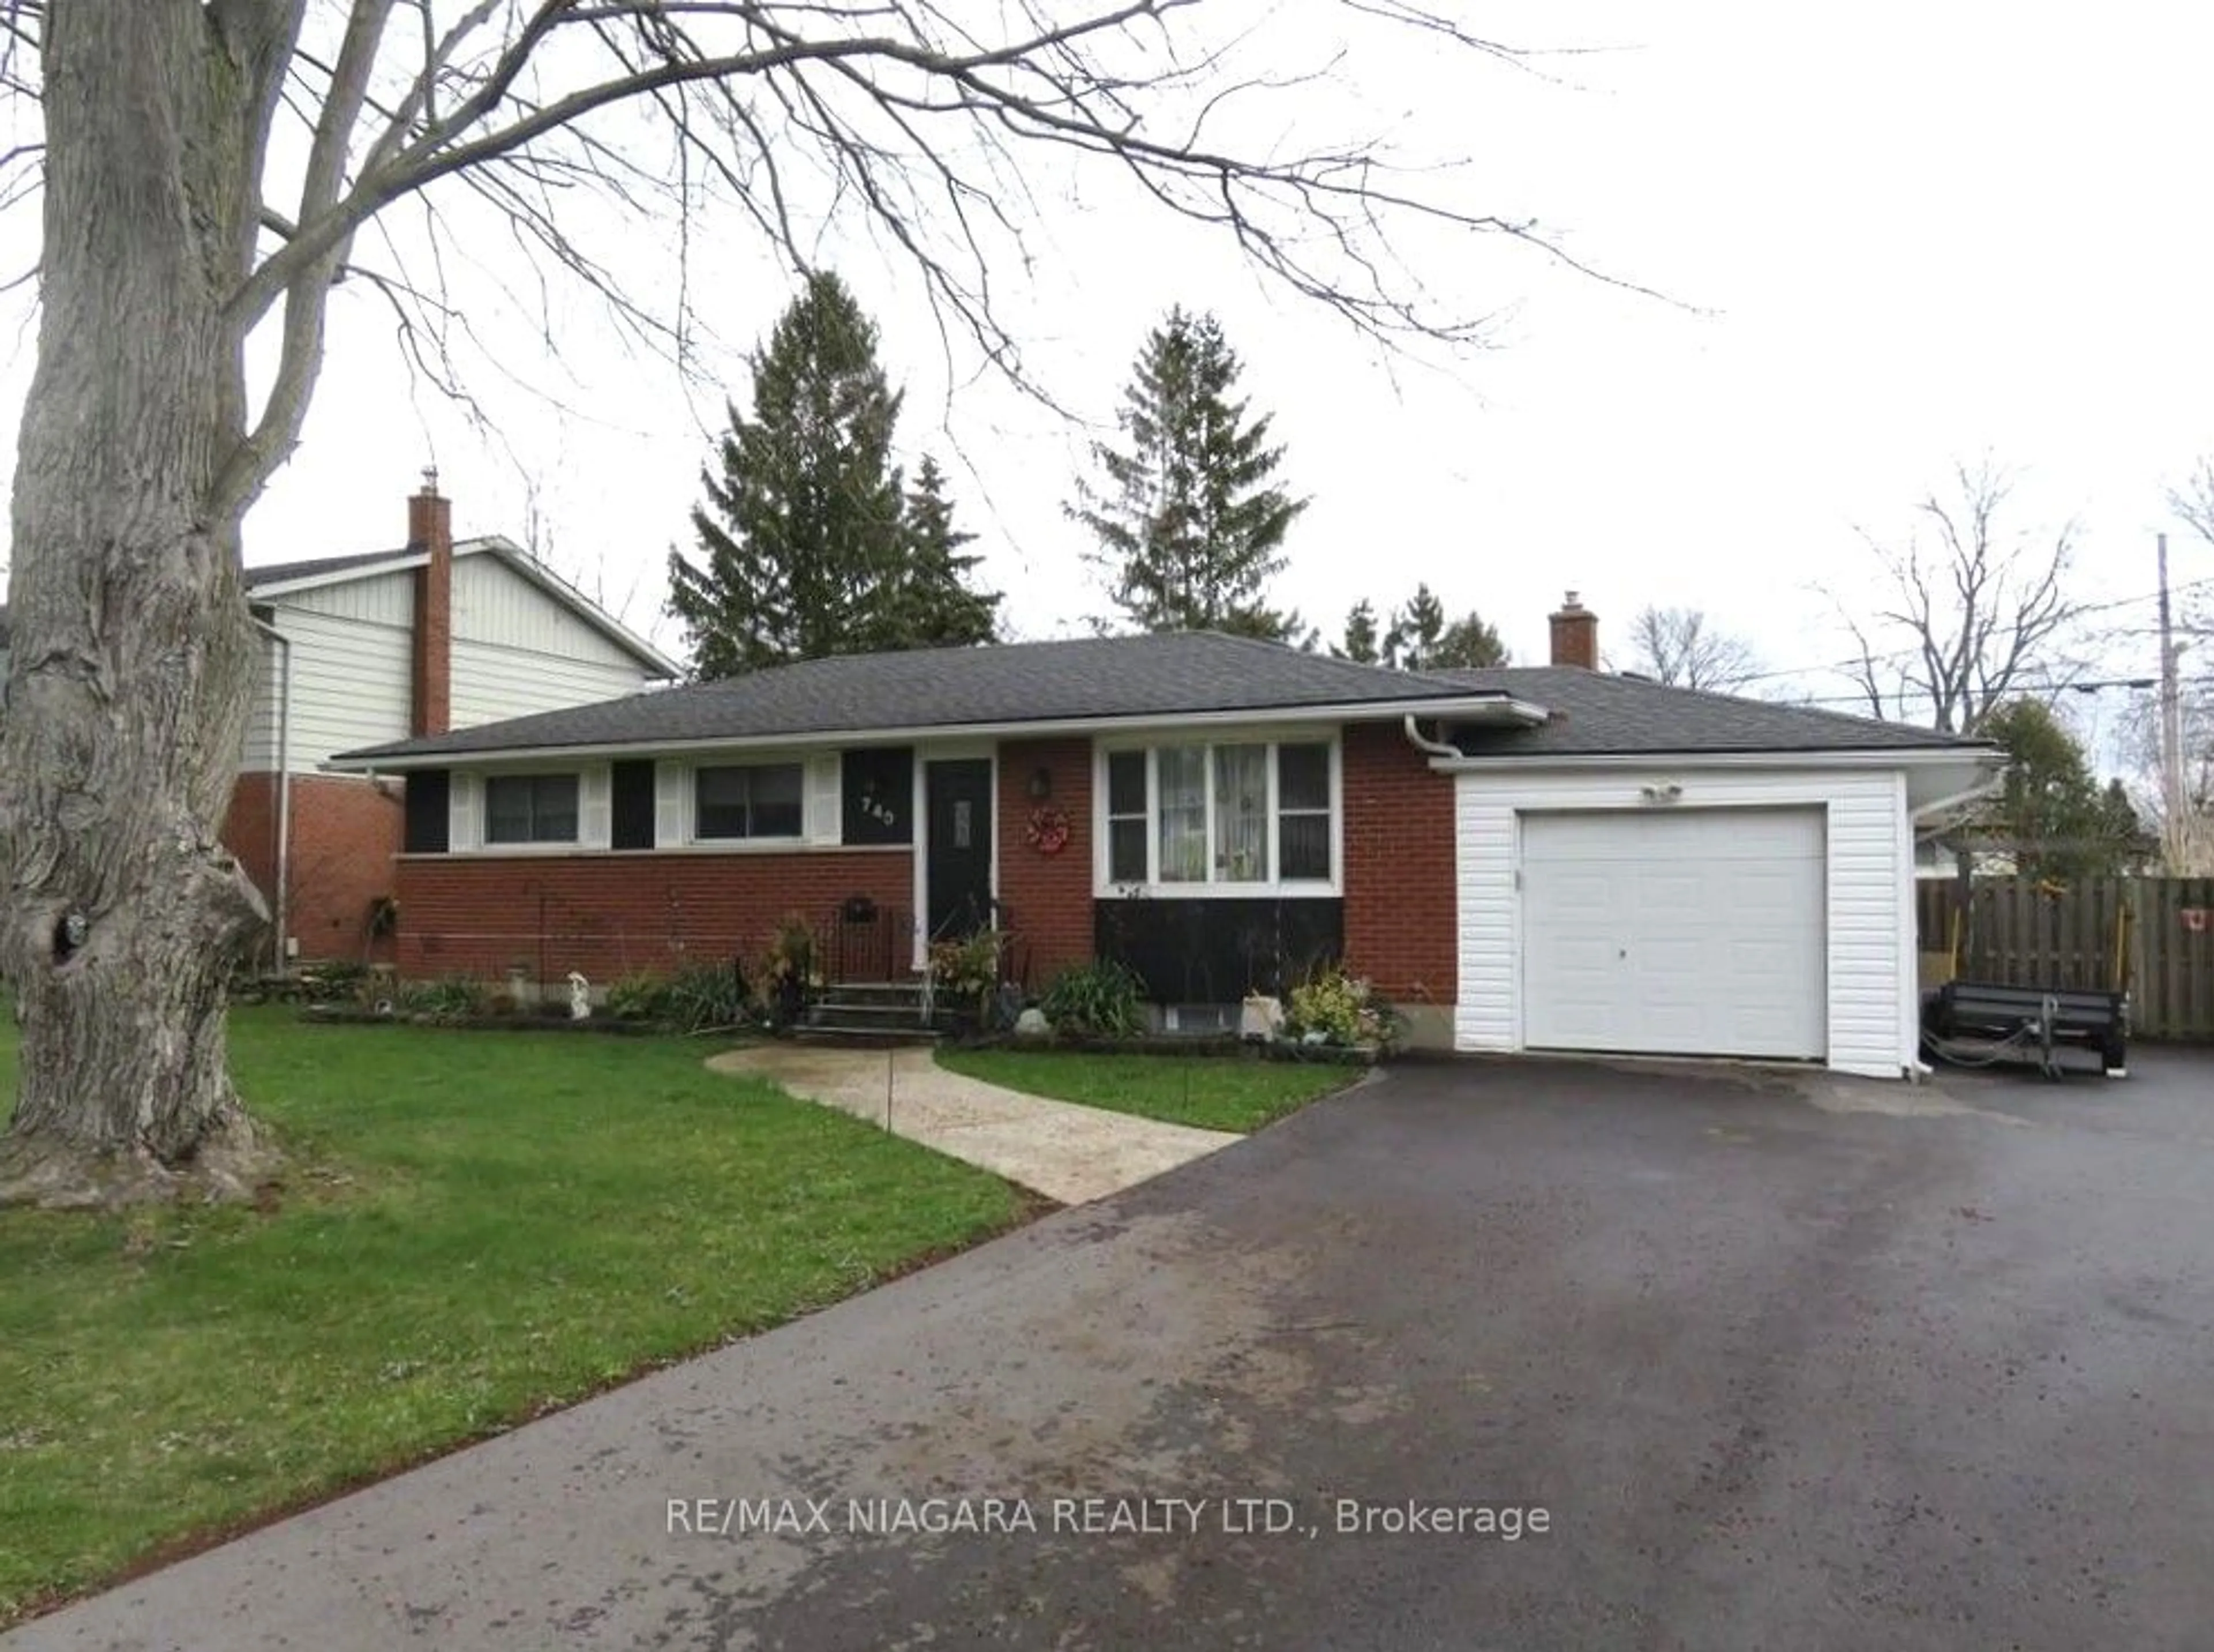 Frontside or backside of a home for 740 Ferndale Ave, Fort Erie Ontario L2A 5E2